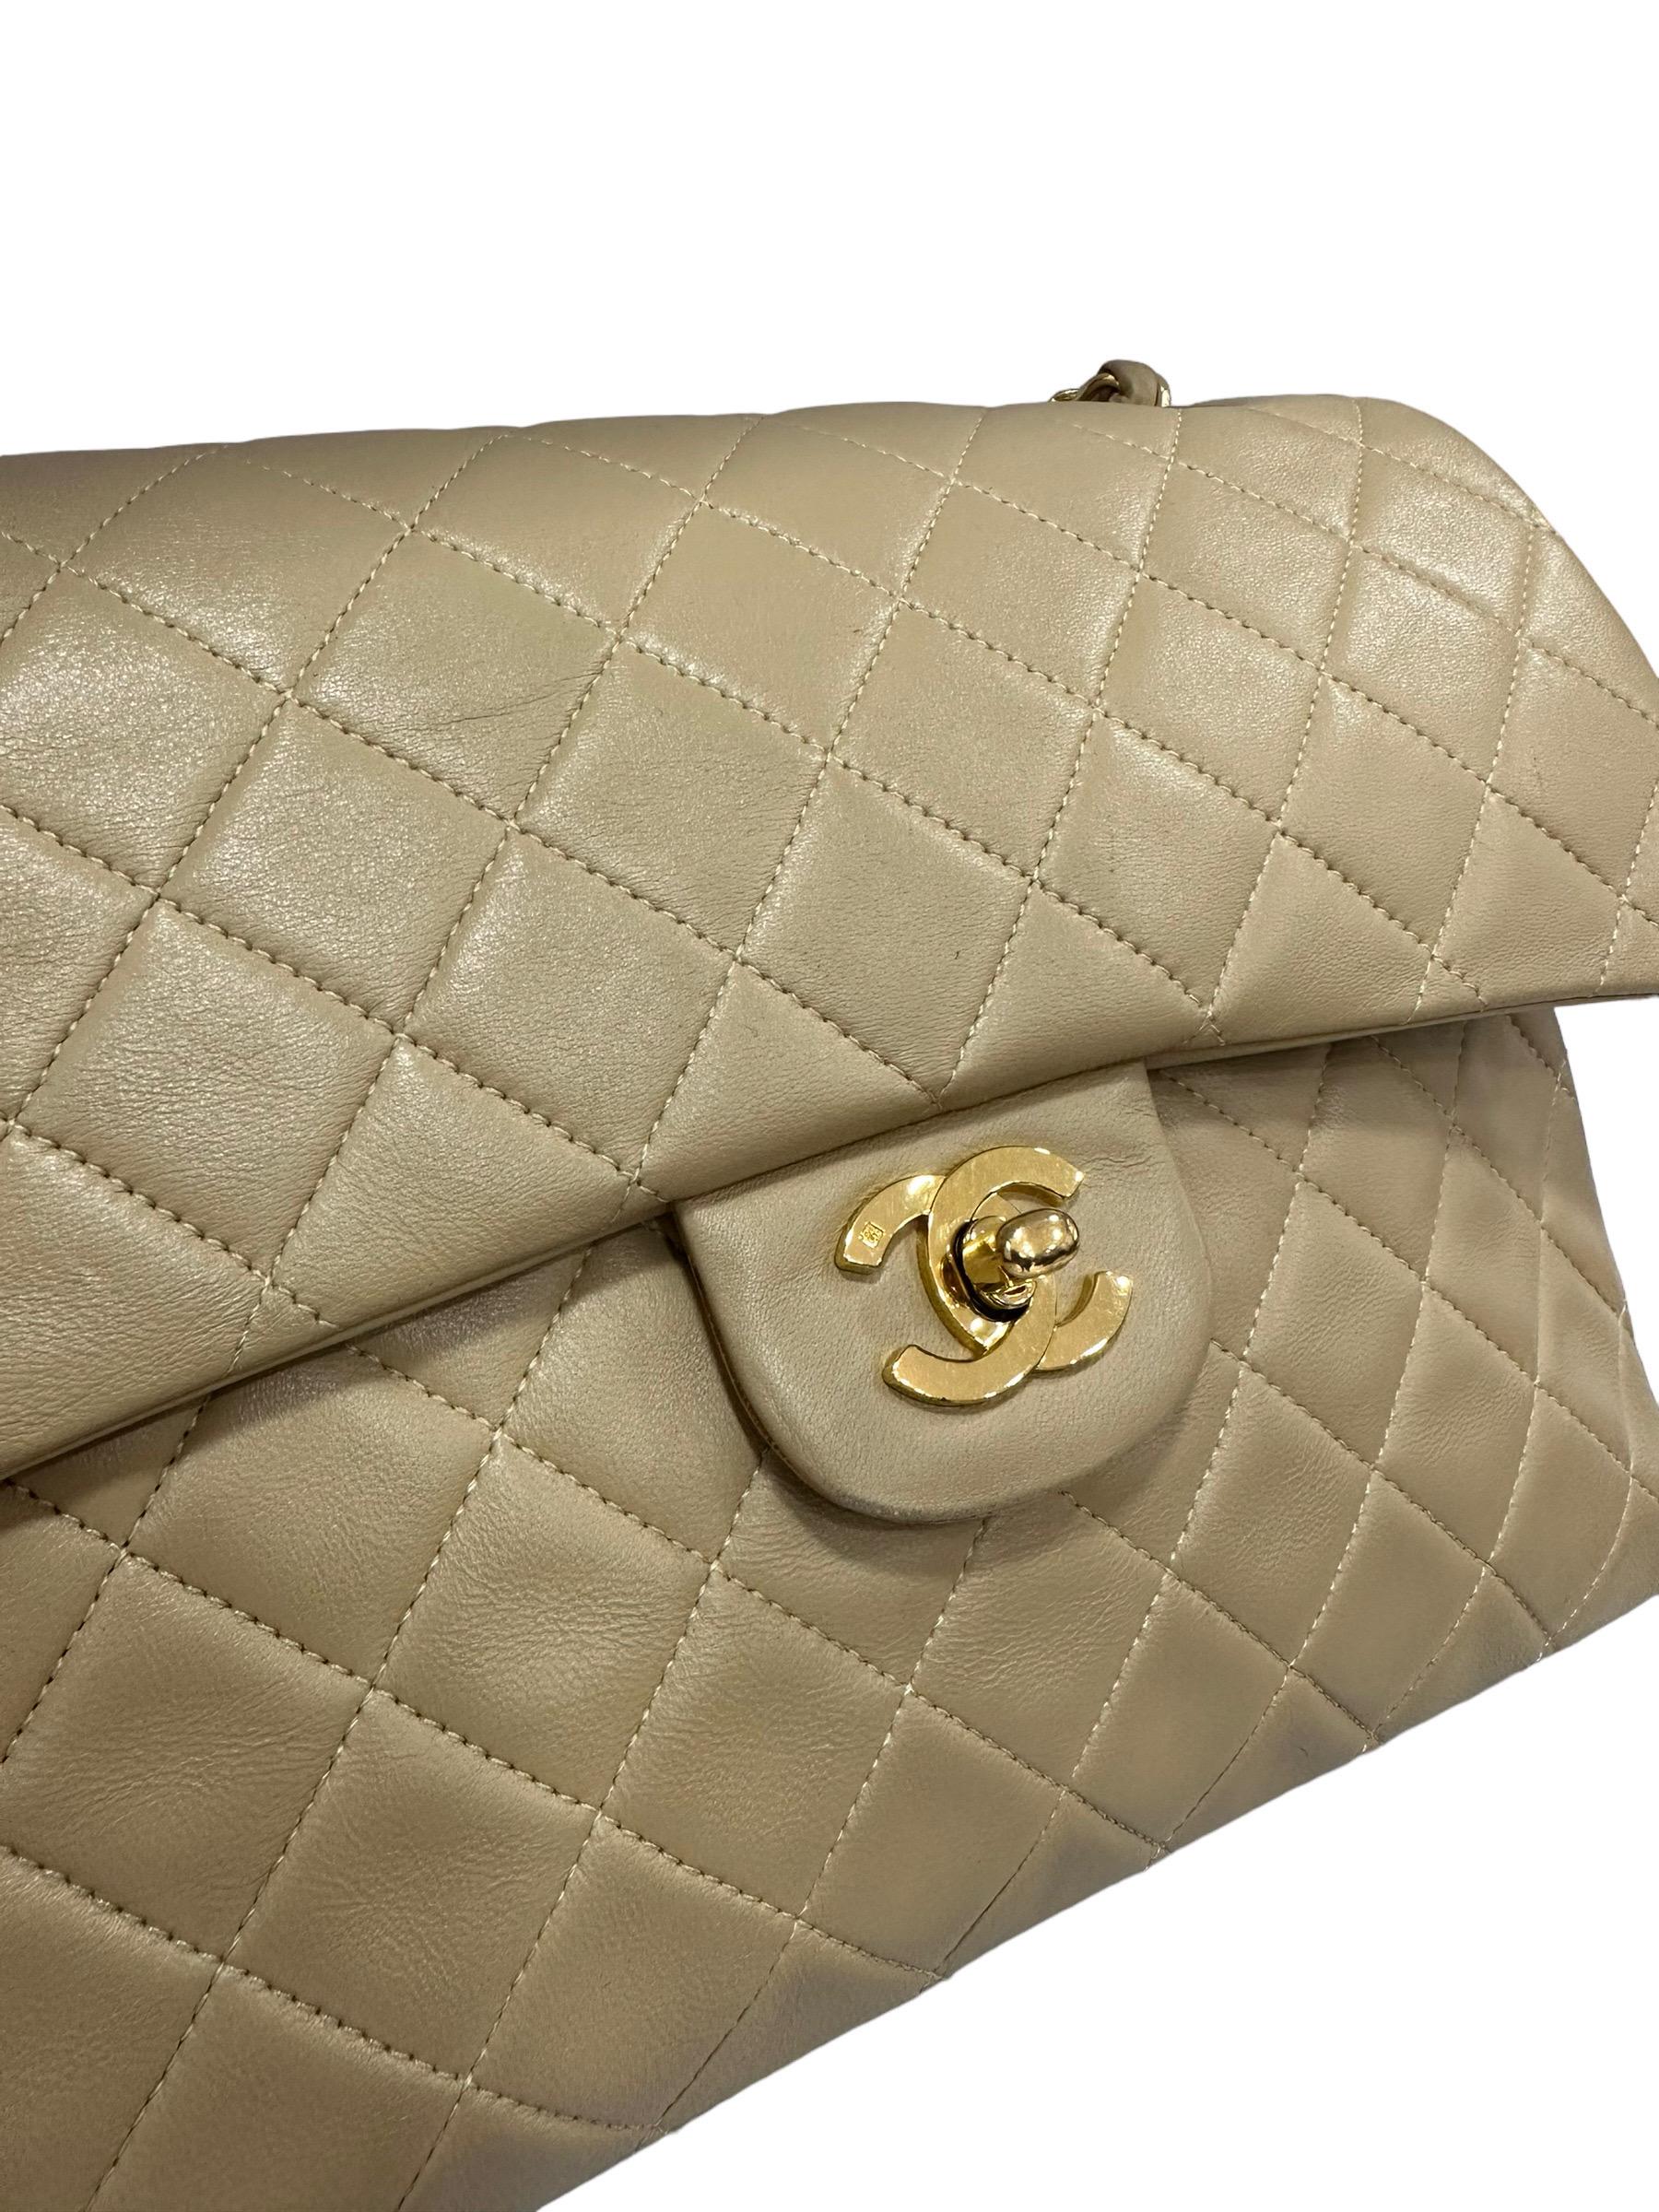 Chanel signed bag, vintage Flap model, made in beige quilted leather with golden hardware. Equipped with double flap, one internal with button closure, and one upper with CC logo turn lock closure. internally lined in beige smooth leather, quite